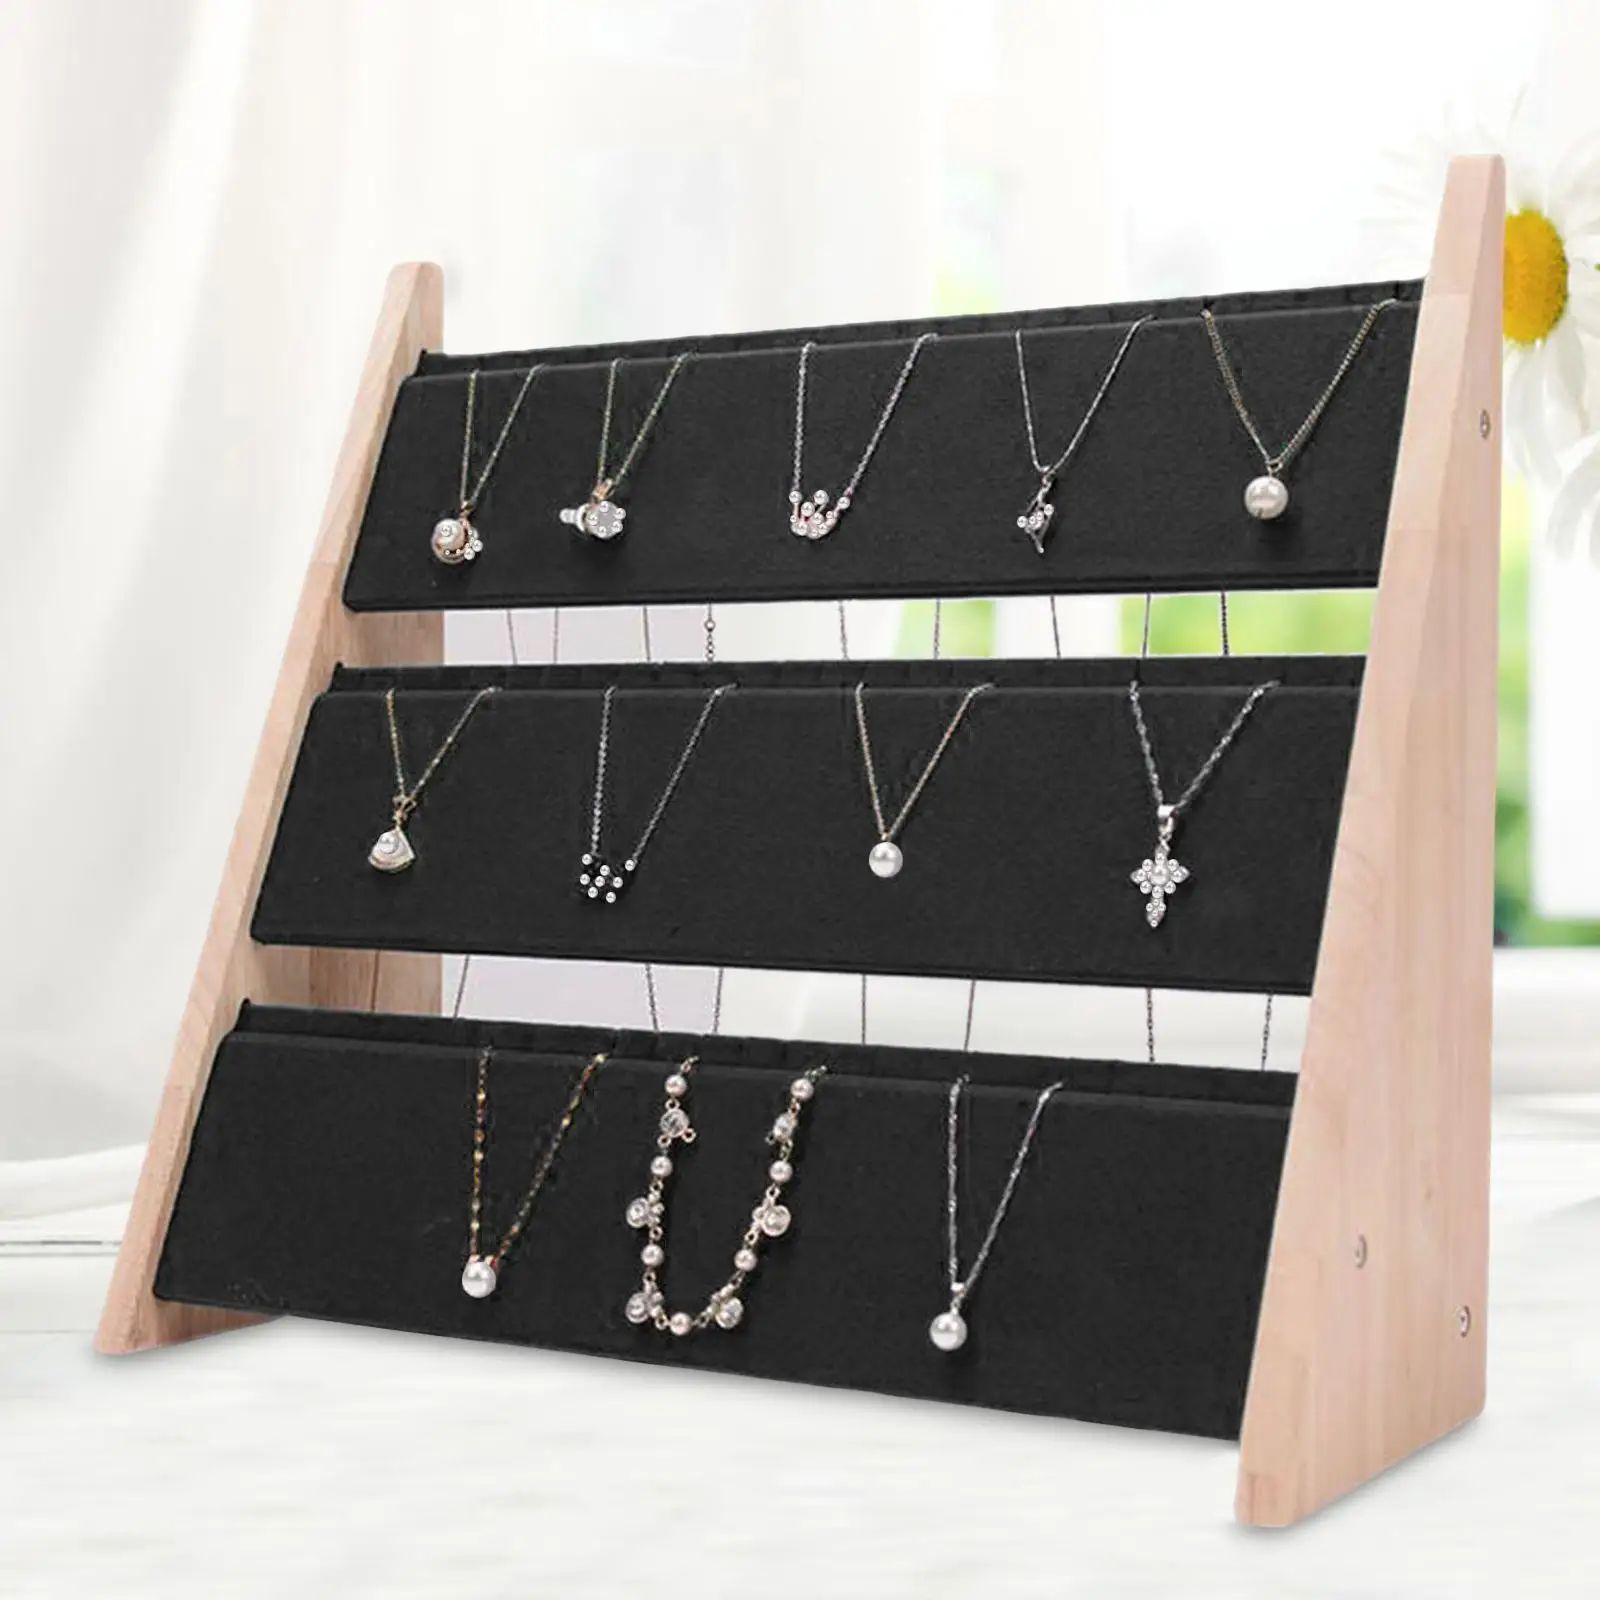 Necklace Display Holder 3 Tiers Storage Rack for Counter Showcase Showroom